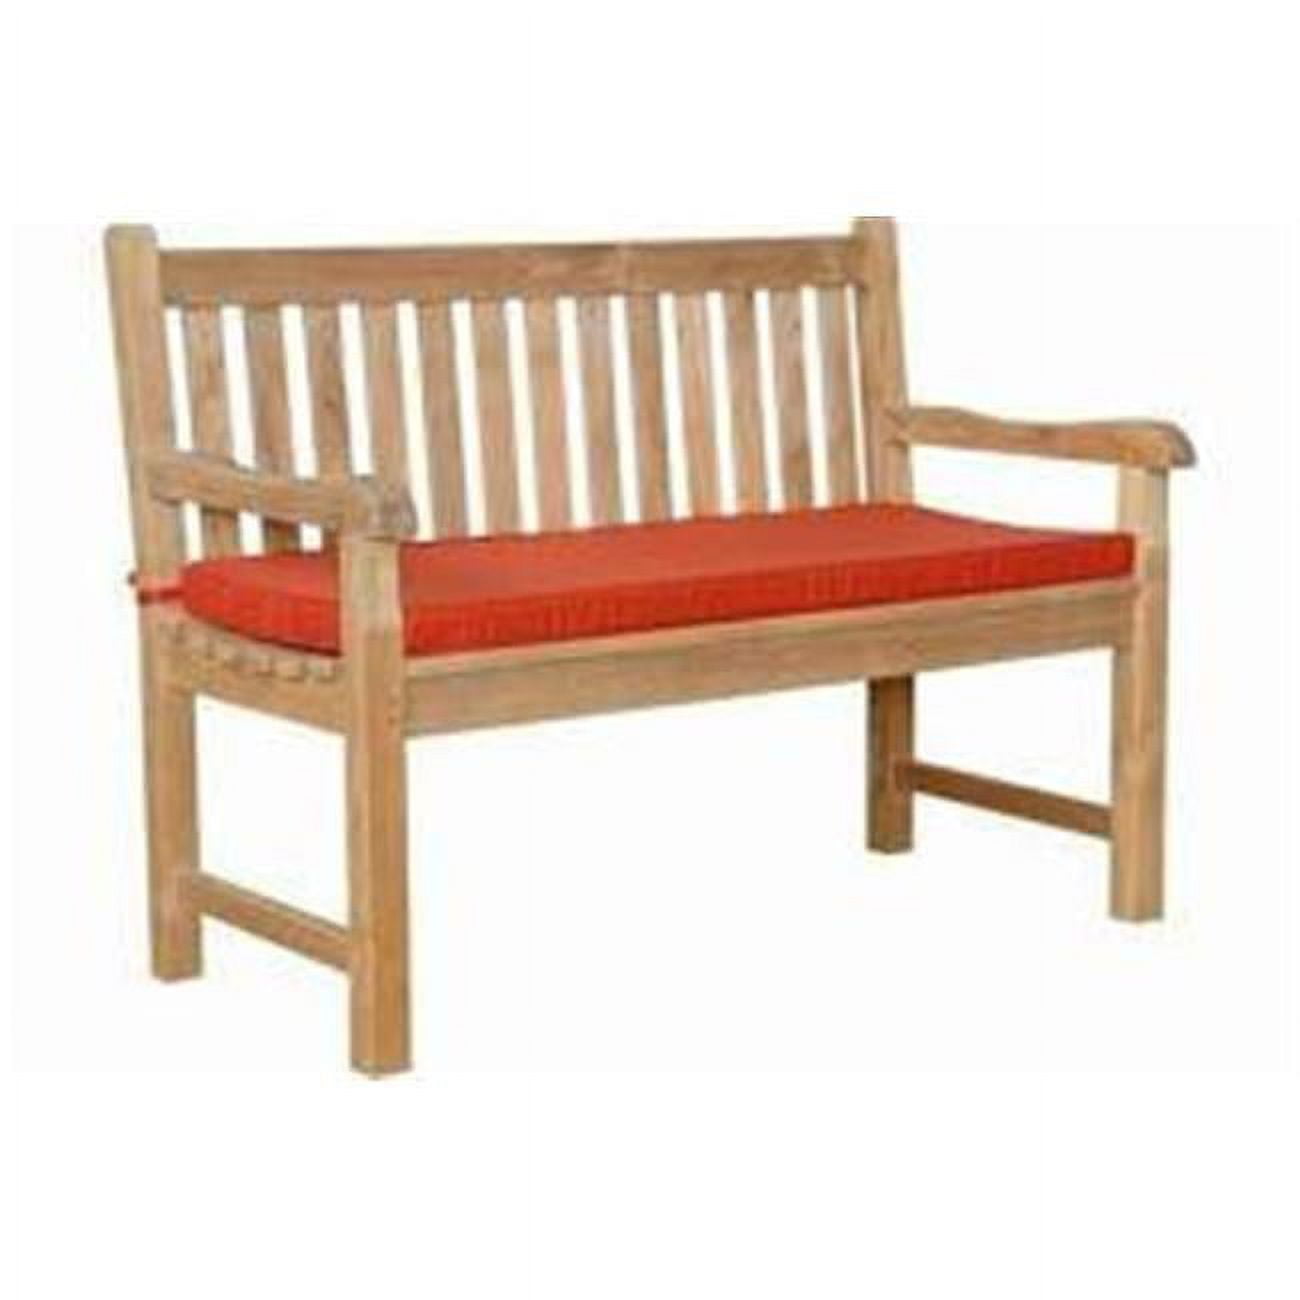 Set-118 4 Ft. Classic Straight Bench